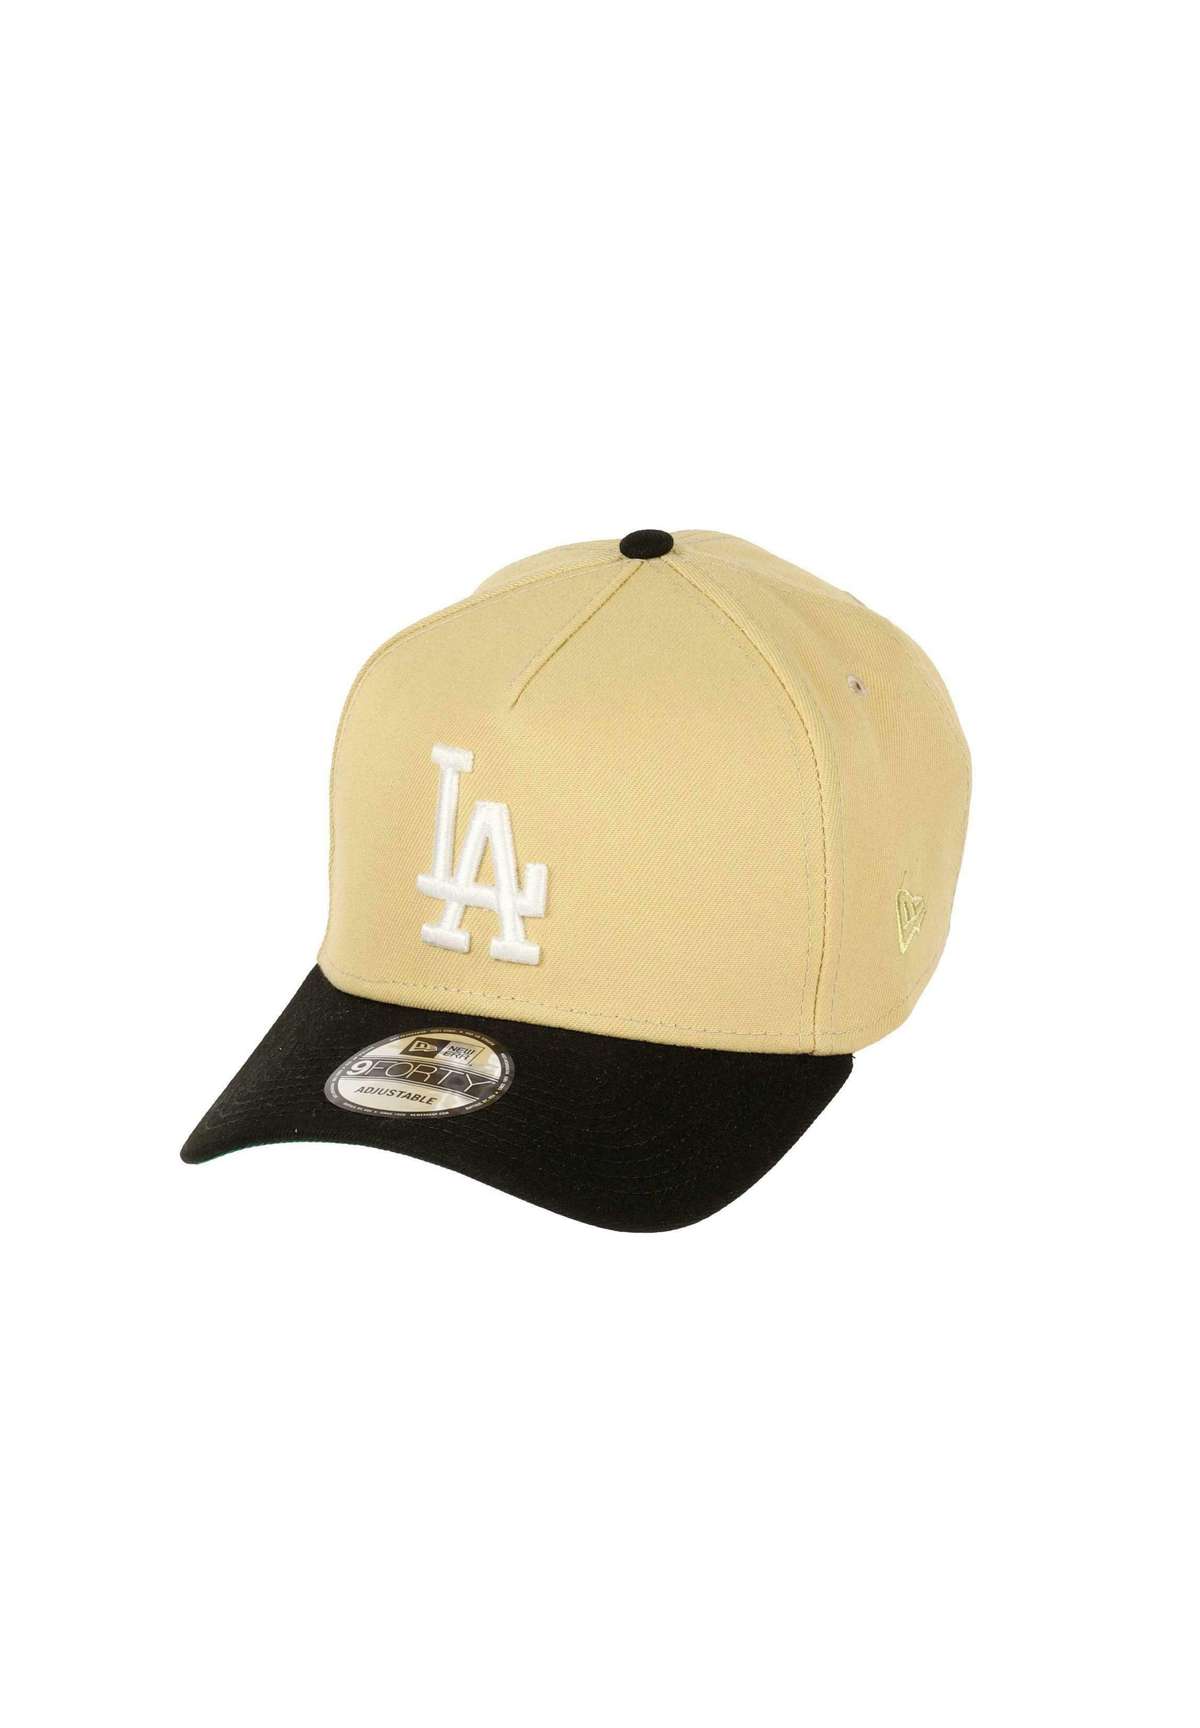 Кепка LOS ANGELES DODGERS MLB DODGERS STADIUM SIDEPATCH COOPERSTOWN VEGAS 9FORTY A-FRAME SNAPBACK